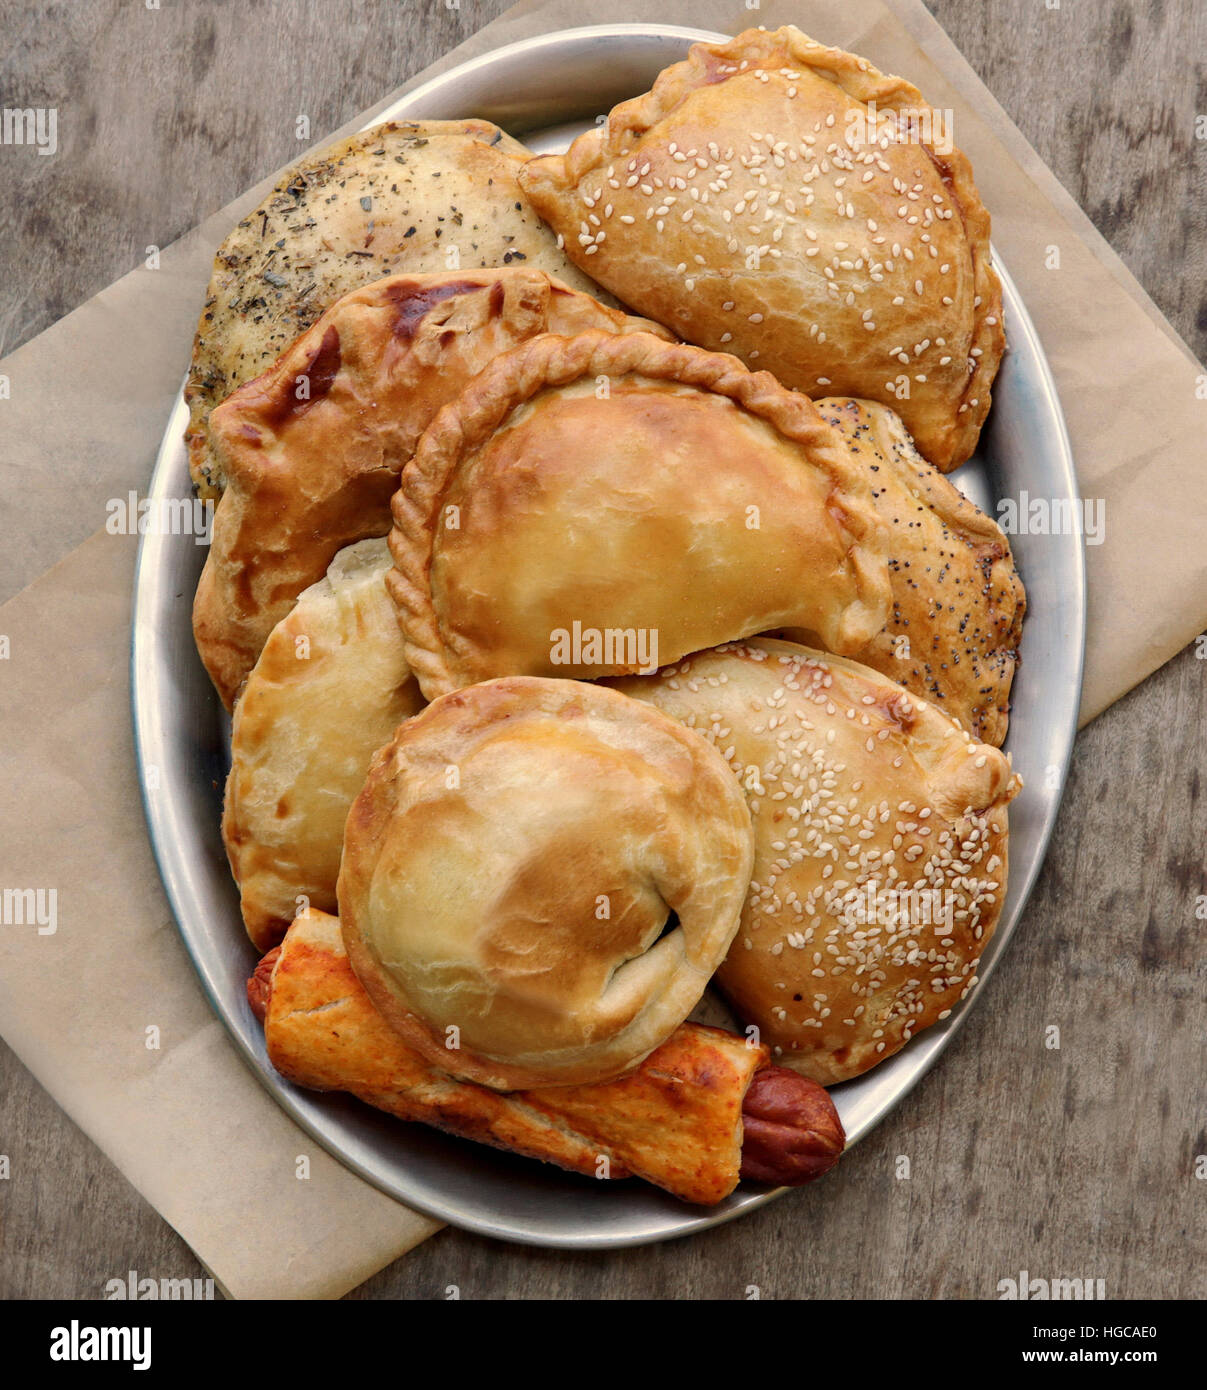 Borek (Also Burek) a Turkish pastry filled with cheese or potato or mushroom Stock Photo